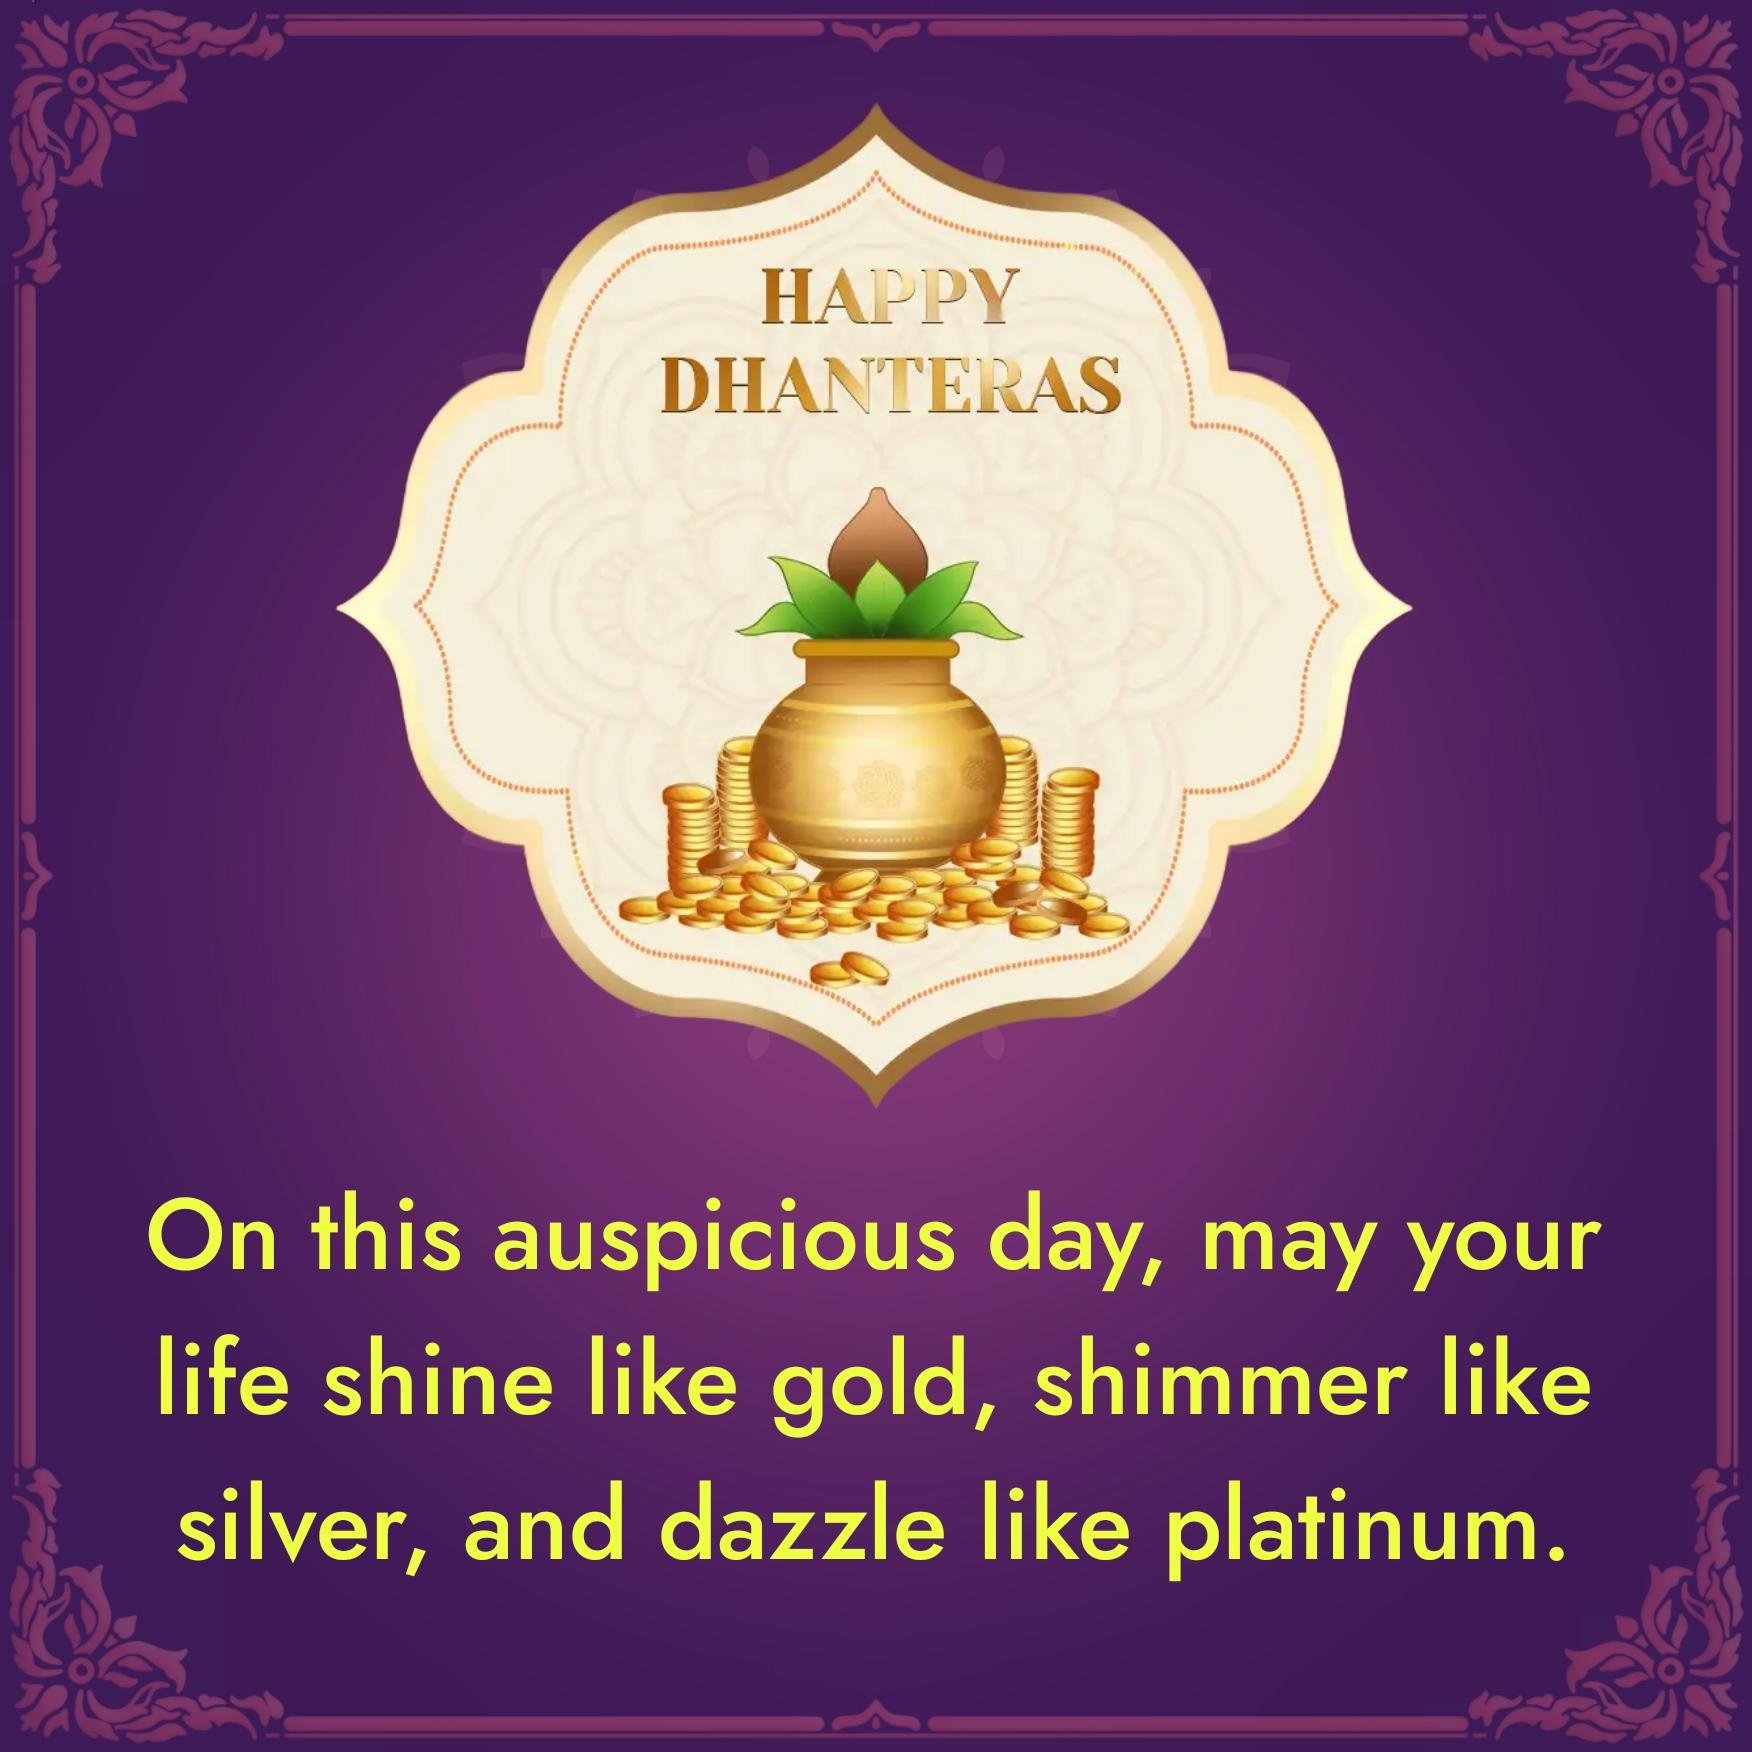 On this auspicious day may your life shine like gold